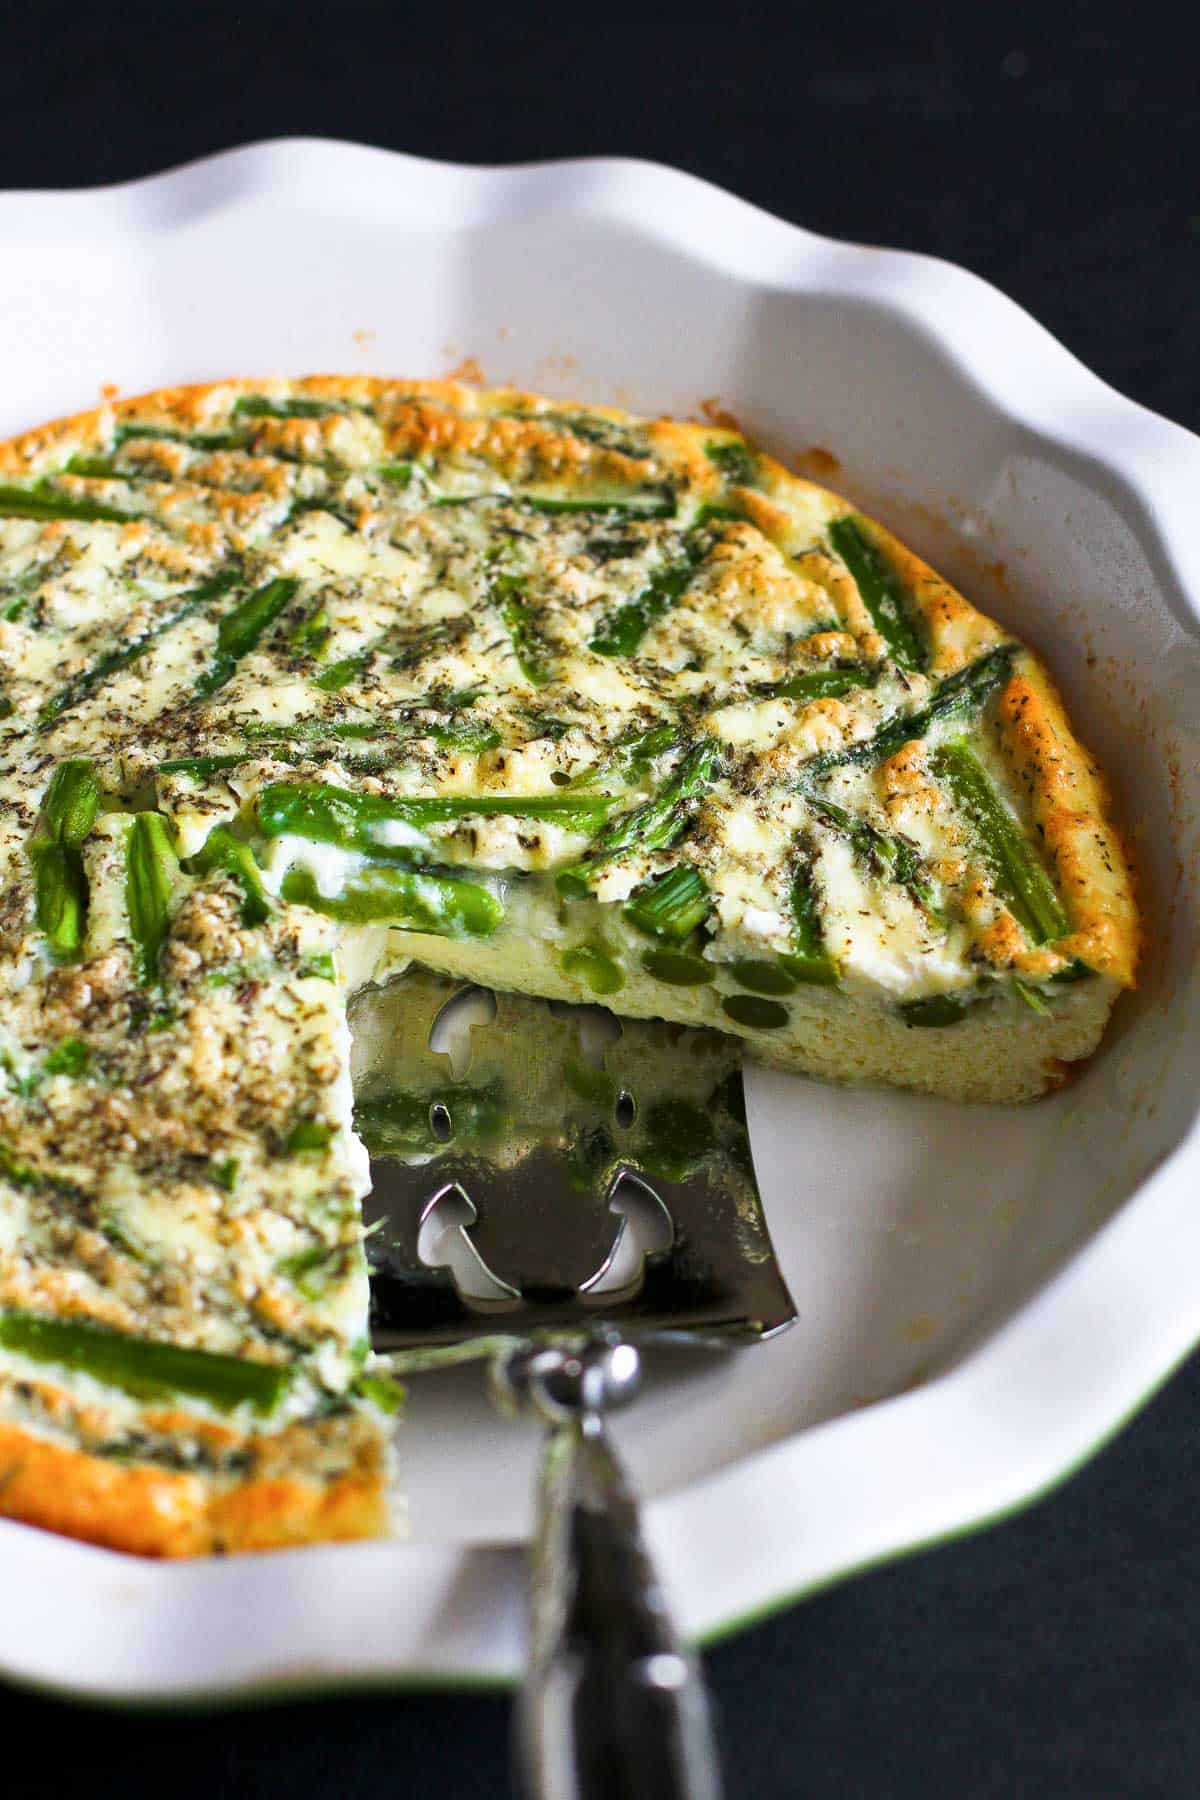 Asparagus quiche in a white pie dish with a silver cake server.